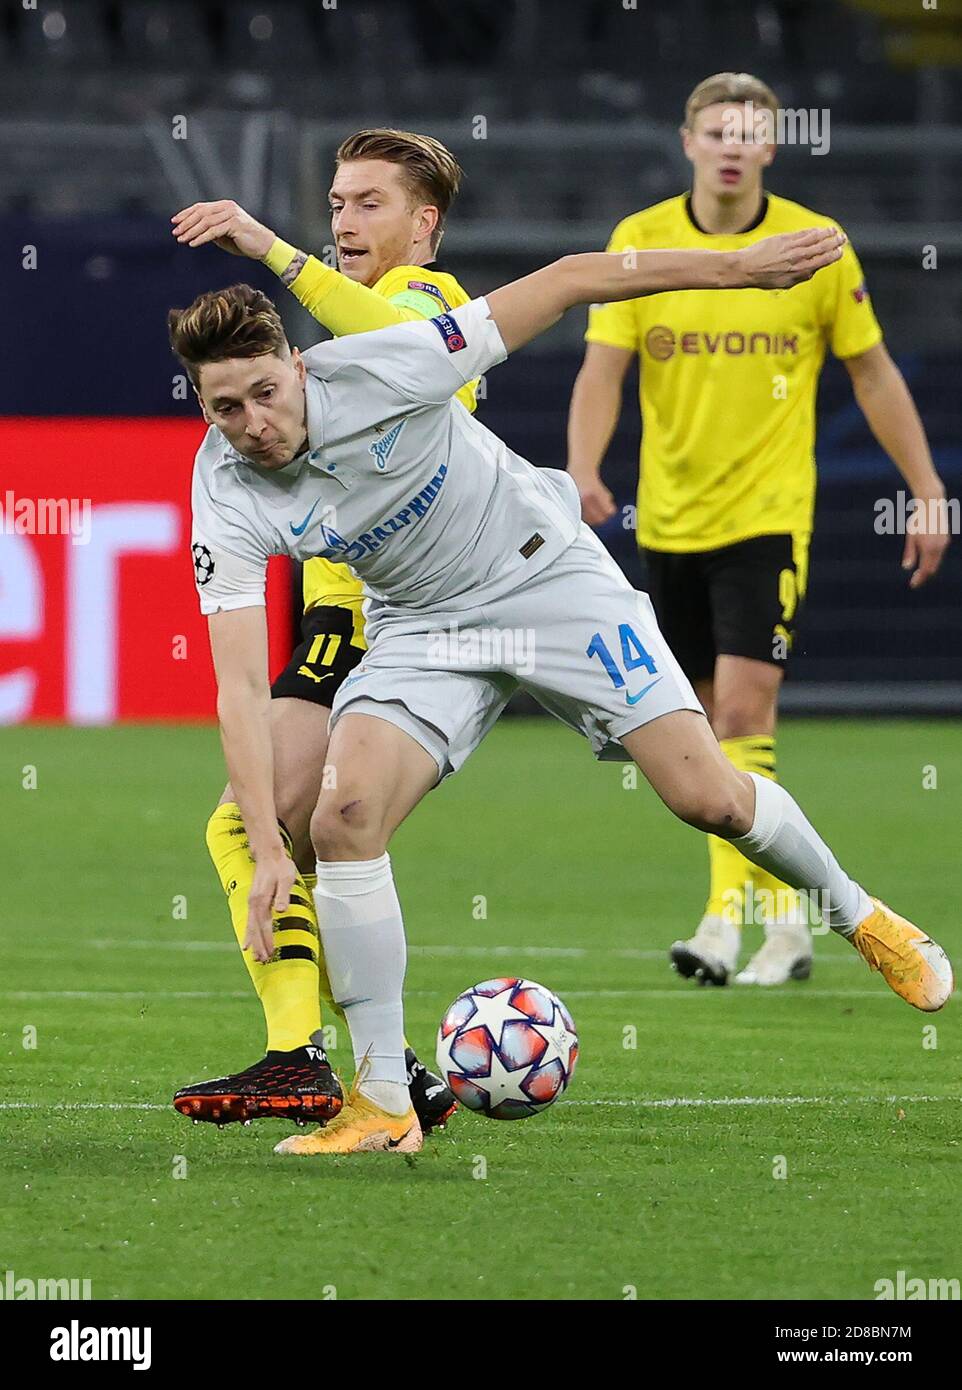 Dortmund, Germany. 28th Oct, 2020. Marco Reus (C) of Dortmund vies with Daler Kuzyayev of Zenit during the UEFA Champions League Group F football match between Borussia Dortmund and FC Zenit in Dortmund, Germany, Oct. 28, 2020. Credit: Joachim Bywaletz/Xinhua/Alamy Live News Stock Photo